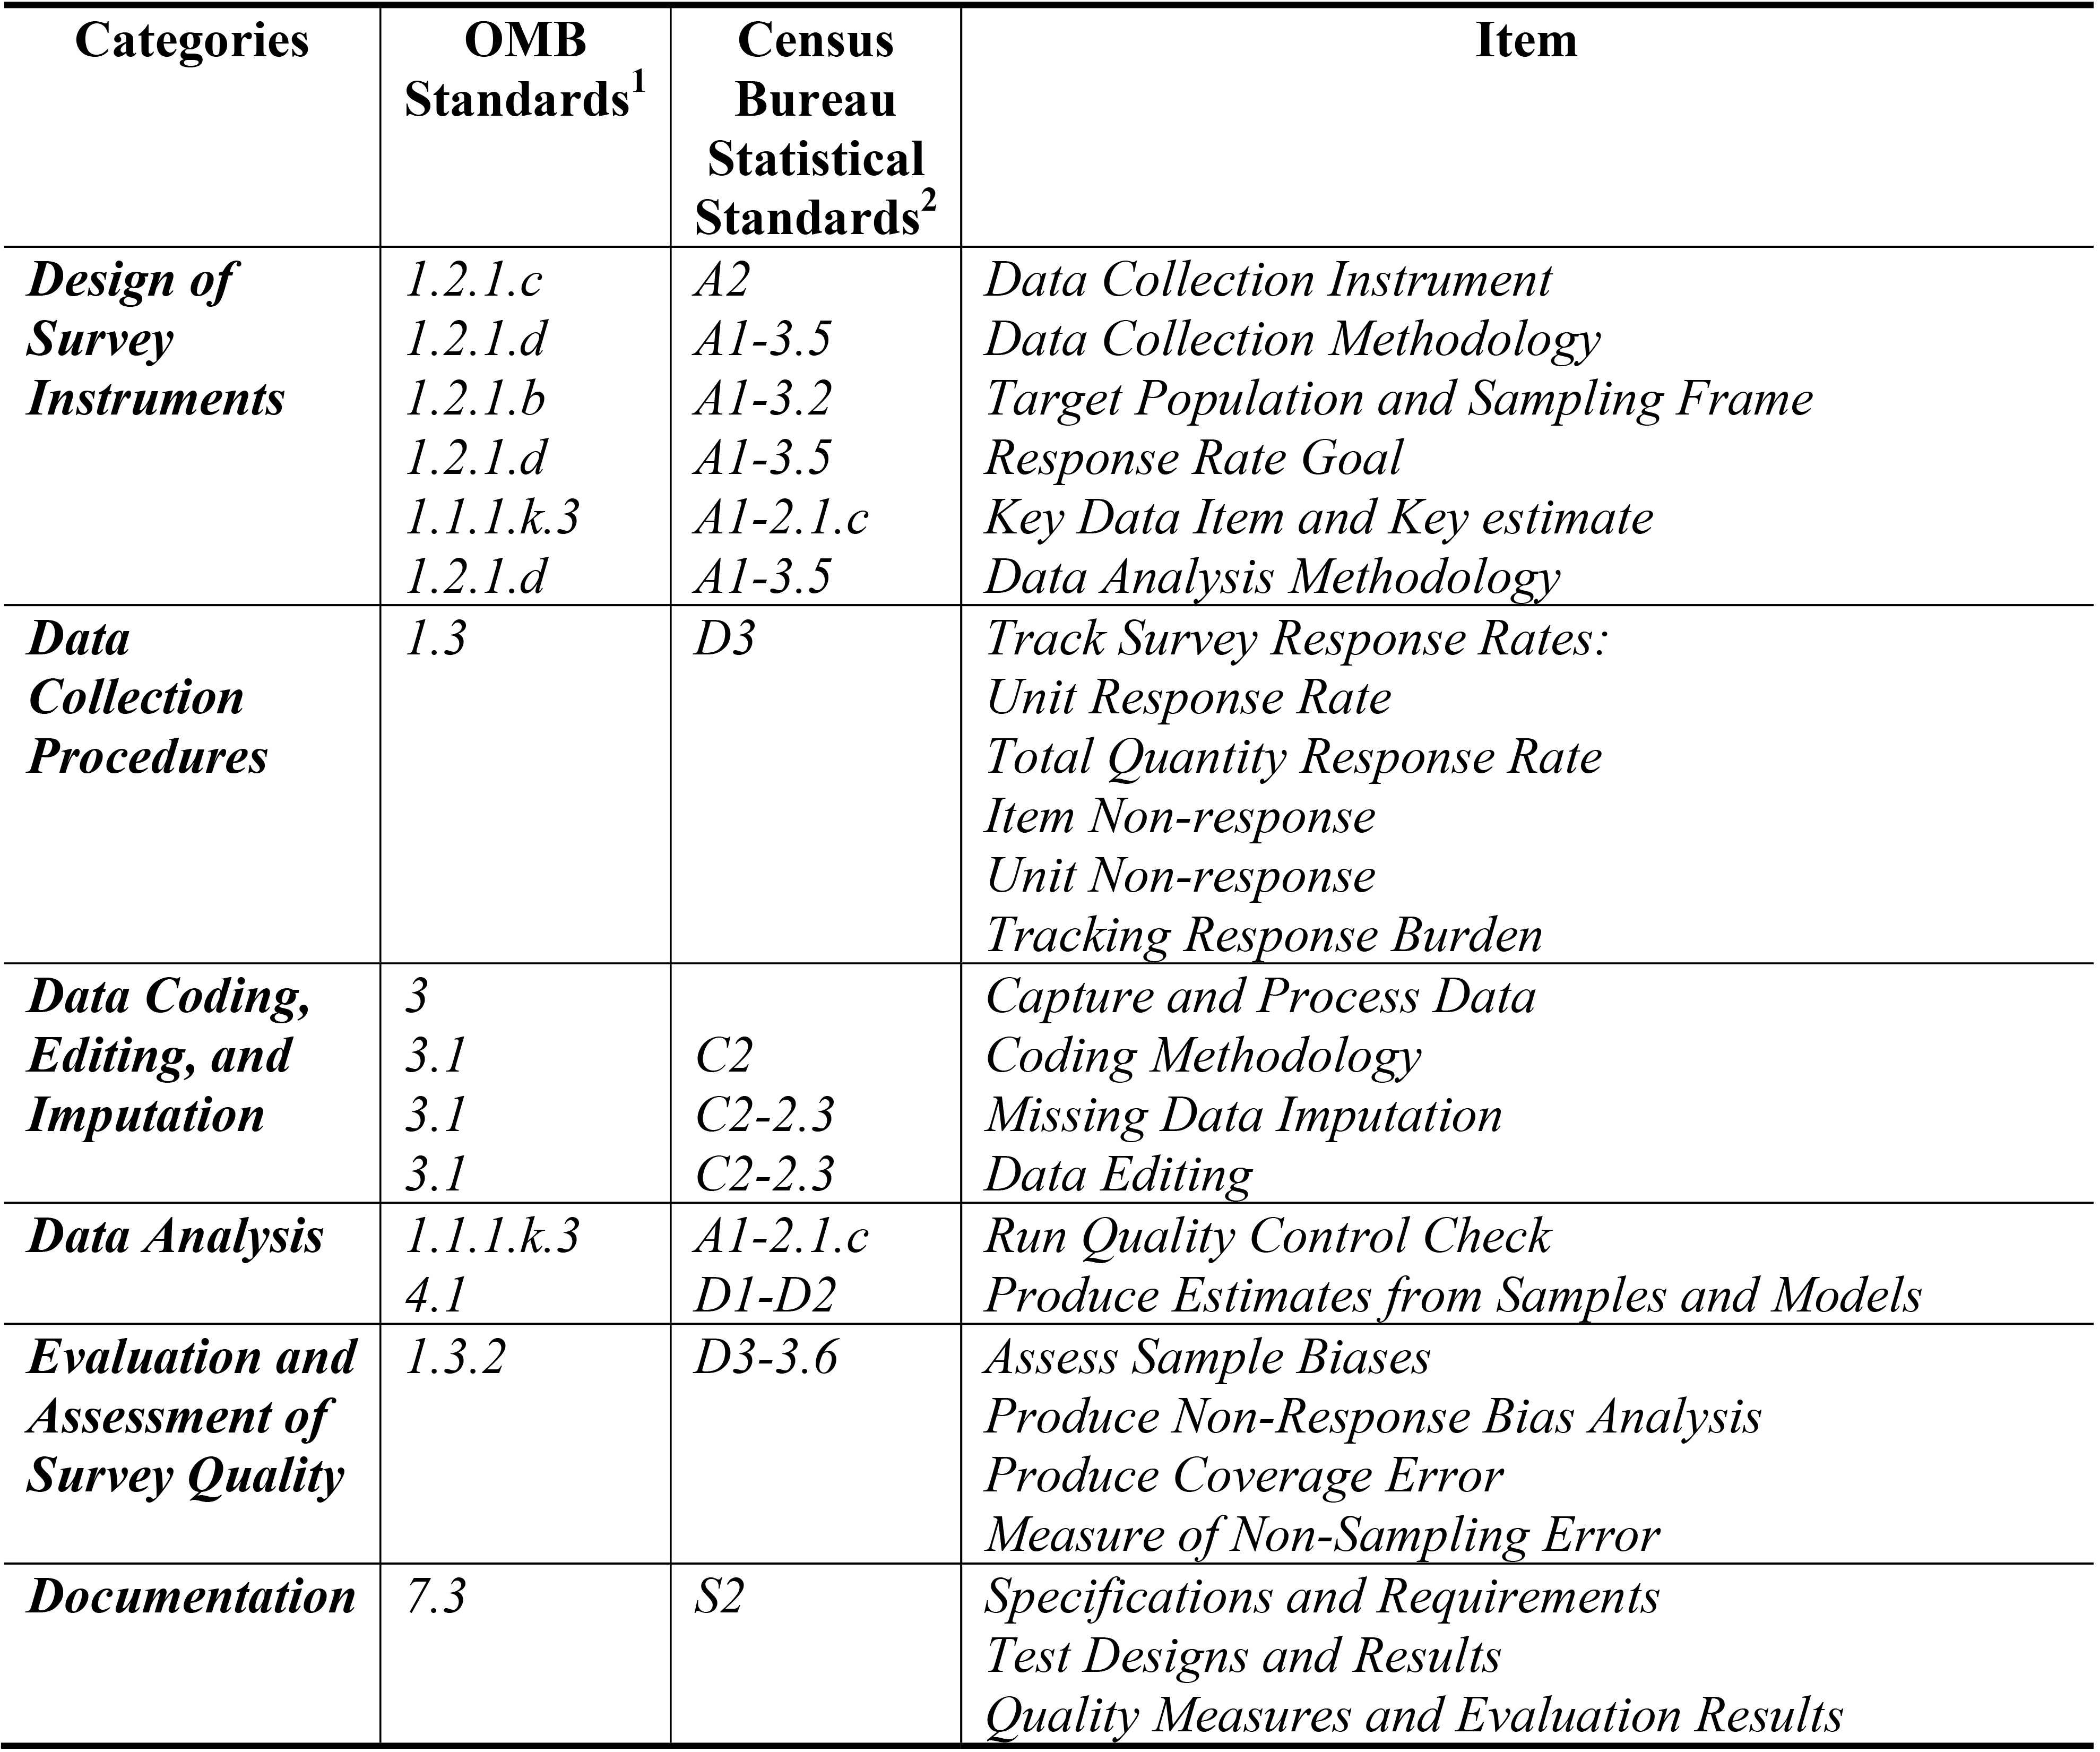 Recommended standardized and guideline requirements. Source: OMB Standards1: https://obamawhitehouse.archives.gov/sites/ default/files/omb/inforeg/statpolicy/standards_stat_surveys.pdf. Census Bureau Statistical Standards2: https://collab.ecm.census.gov/teamsites/ quality/intranet/Pages/Quality%20Standards%20and%20Guidelines.aspx.